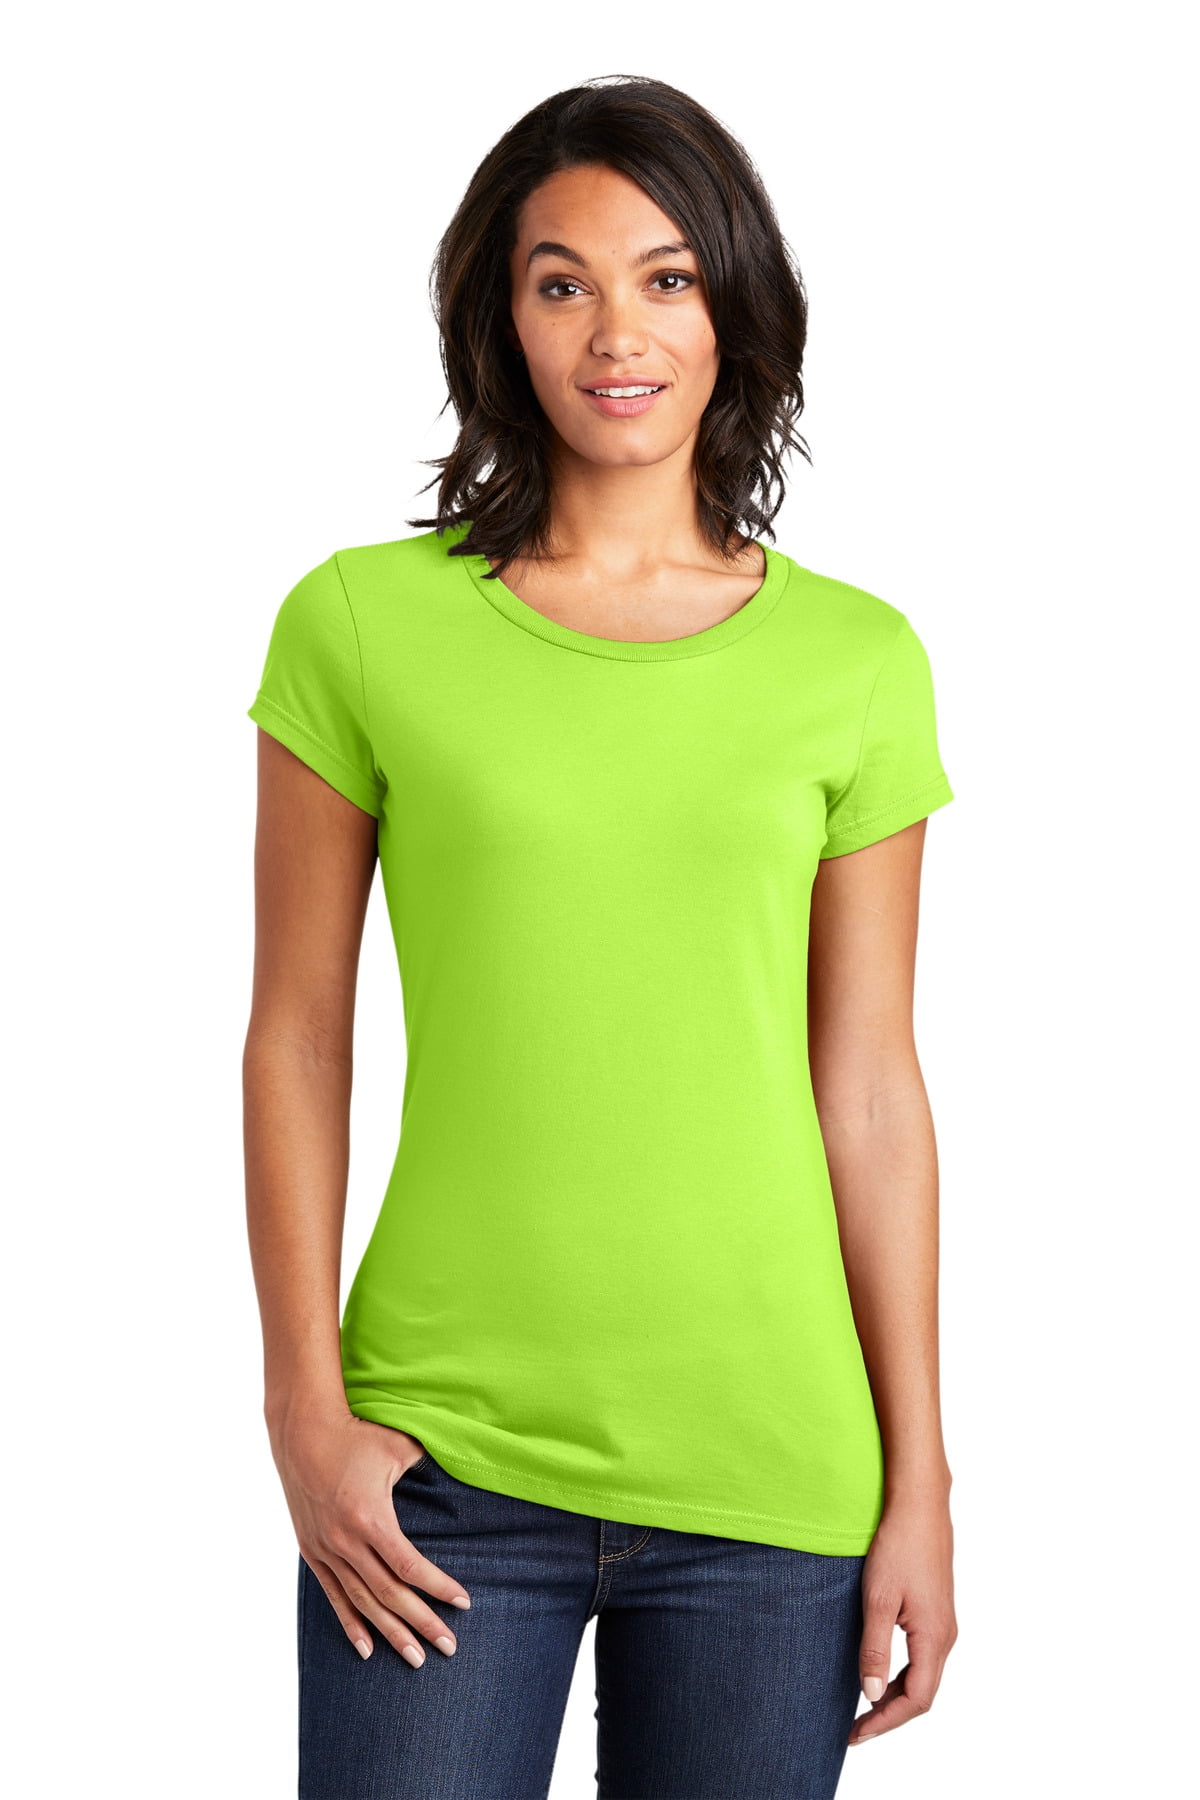 District DT6001 Juniors Very Important Tee , Lime Shock, XL